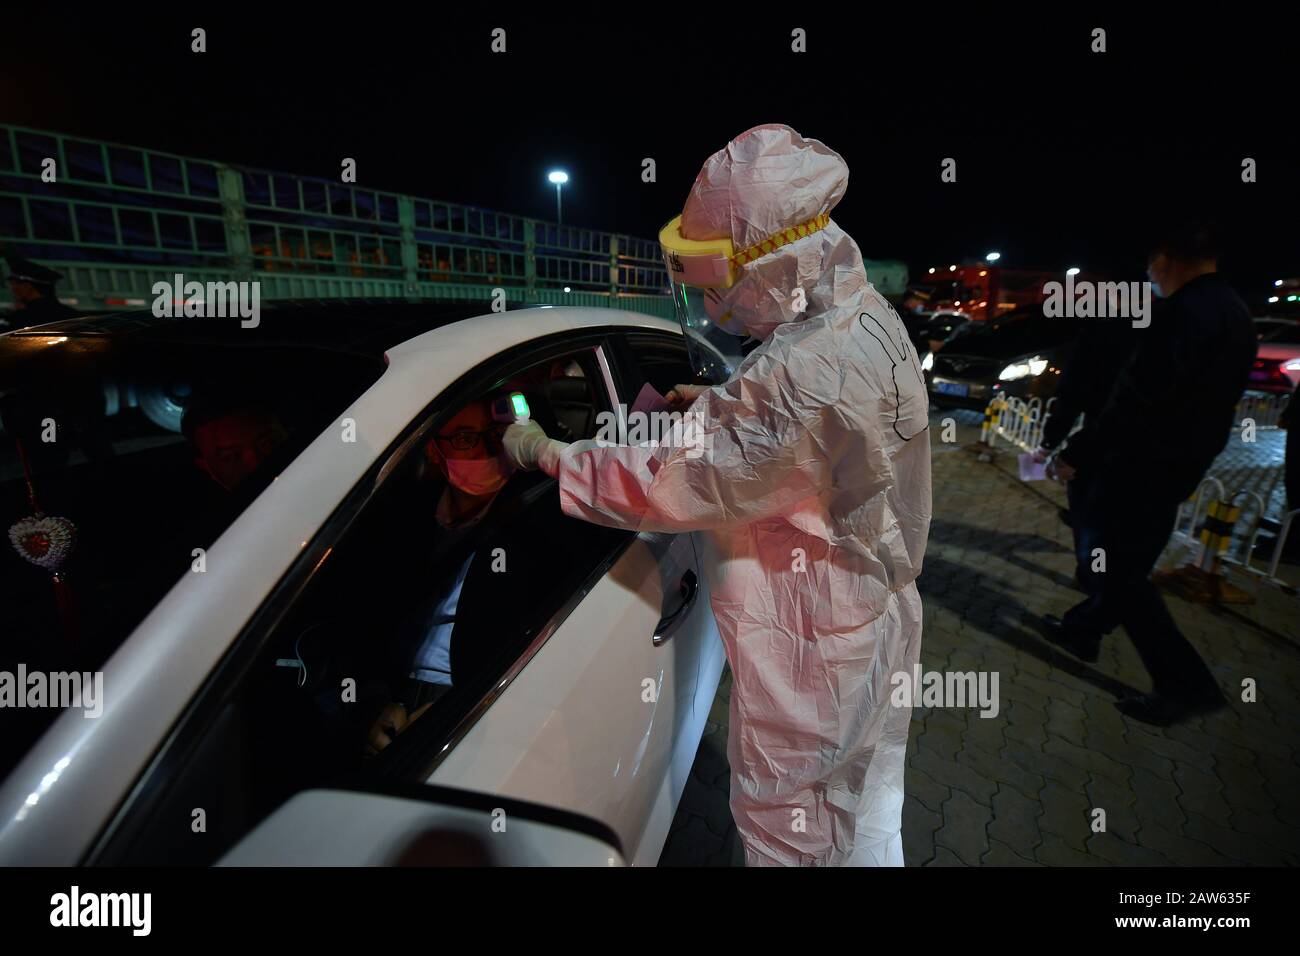 (200207) -- HAIKOU, Feb. 7, 2020 (Xinhua) -- A staff member measures body temperature of a passenger at Xinhaigang Ferry Terminal in Haikou, south China's Hainan province, Feb. 6, 2020. Qiongzhou Strait is a major passage into and out of Hainan Island. Since the start of the prevention and control of pneumonia caused by the novel coronavirus, Hainan and Guangdong have both moved the prevention and control threshold forward. Hainan has sent more than 160 joint anti-epidemic personnel from multiple departments to Zhanjiang of Guangdong Province, and set up four prevention and control points and Stock Photo